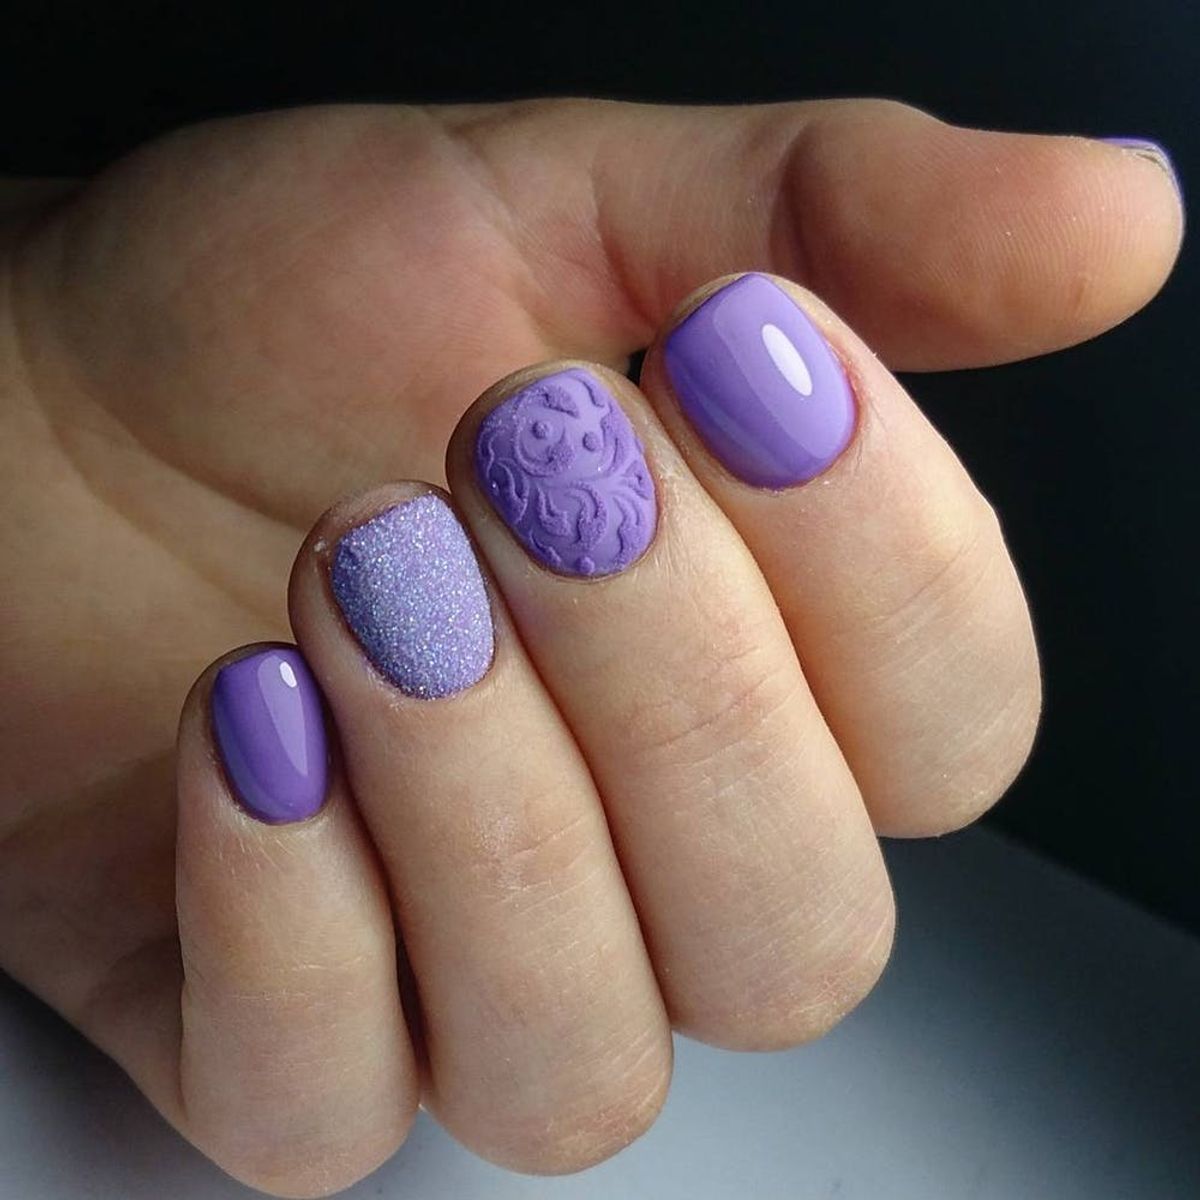 10 Trending Nail Ideas to Try This February